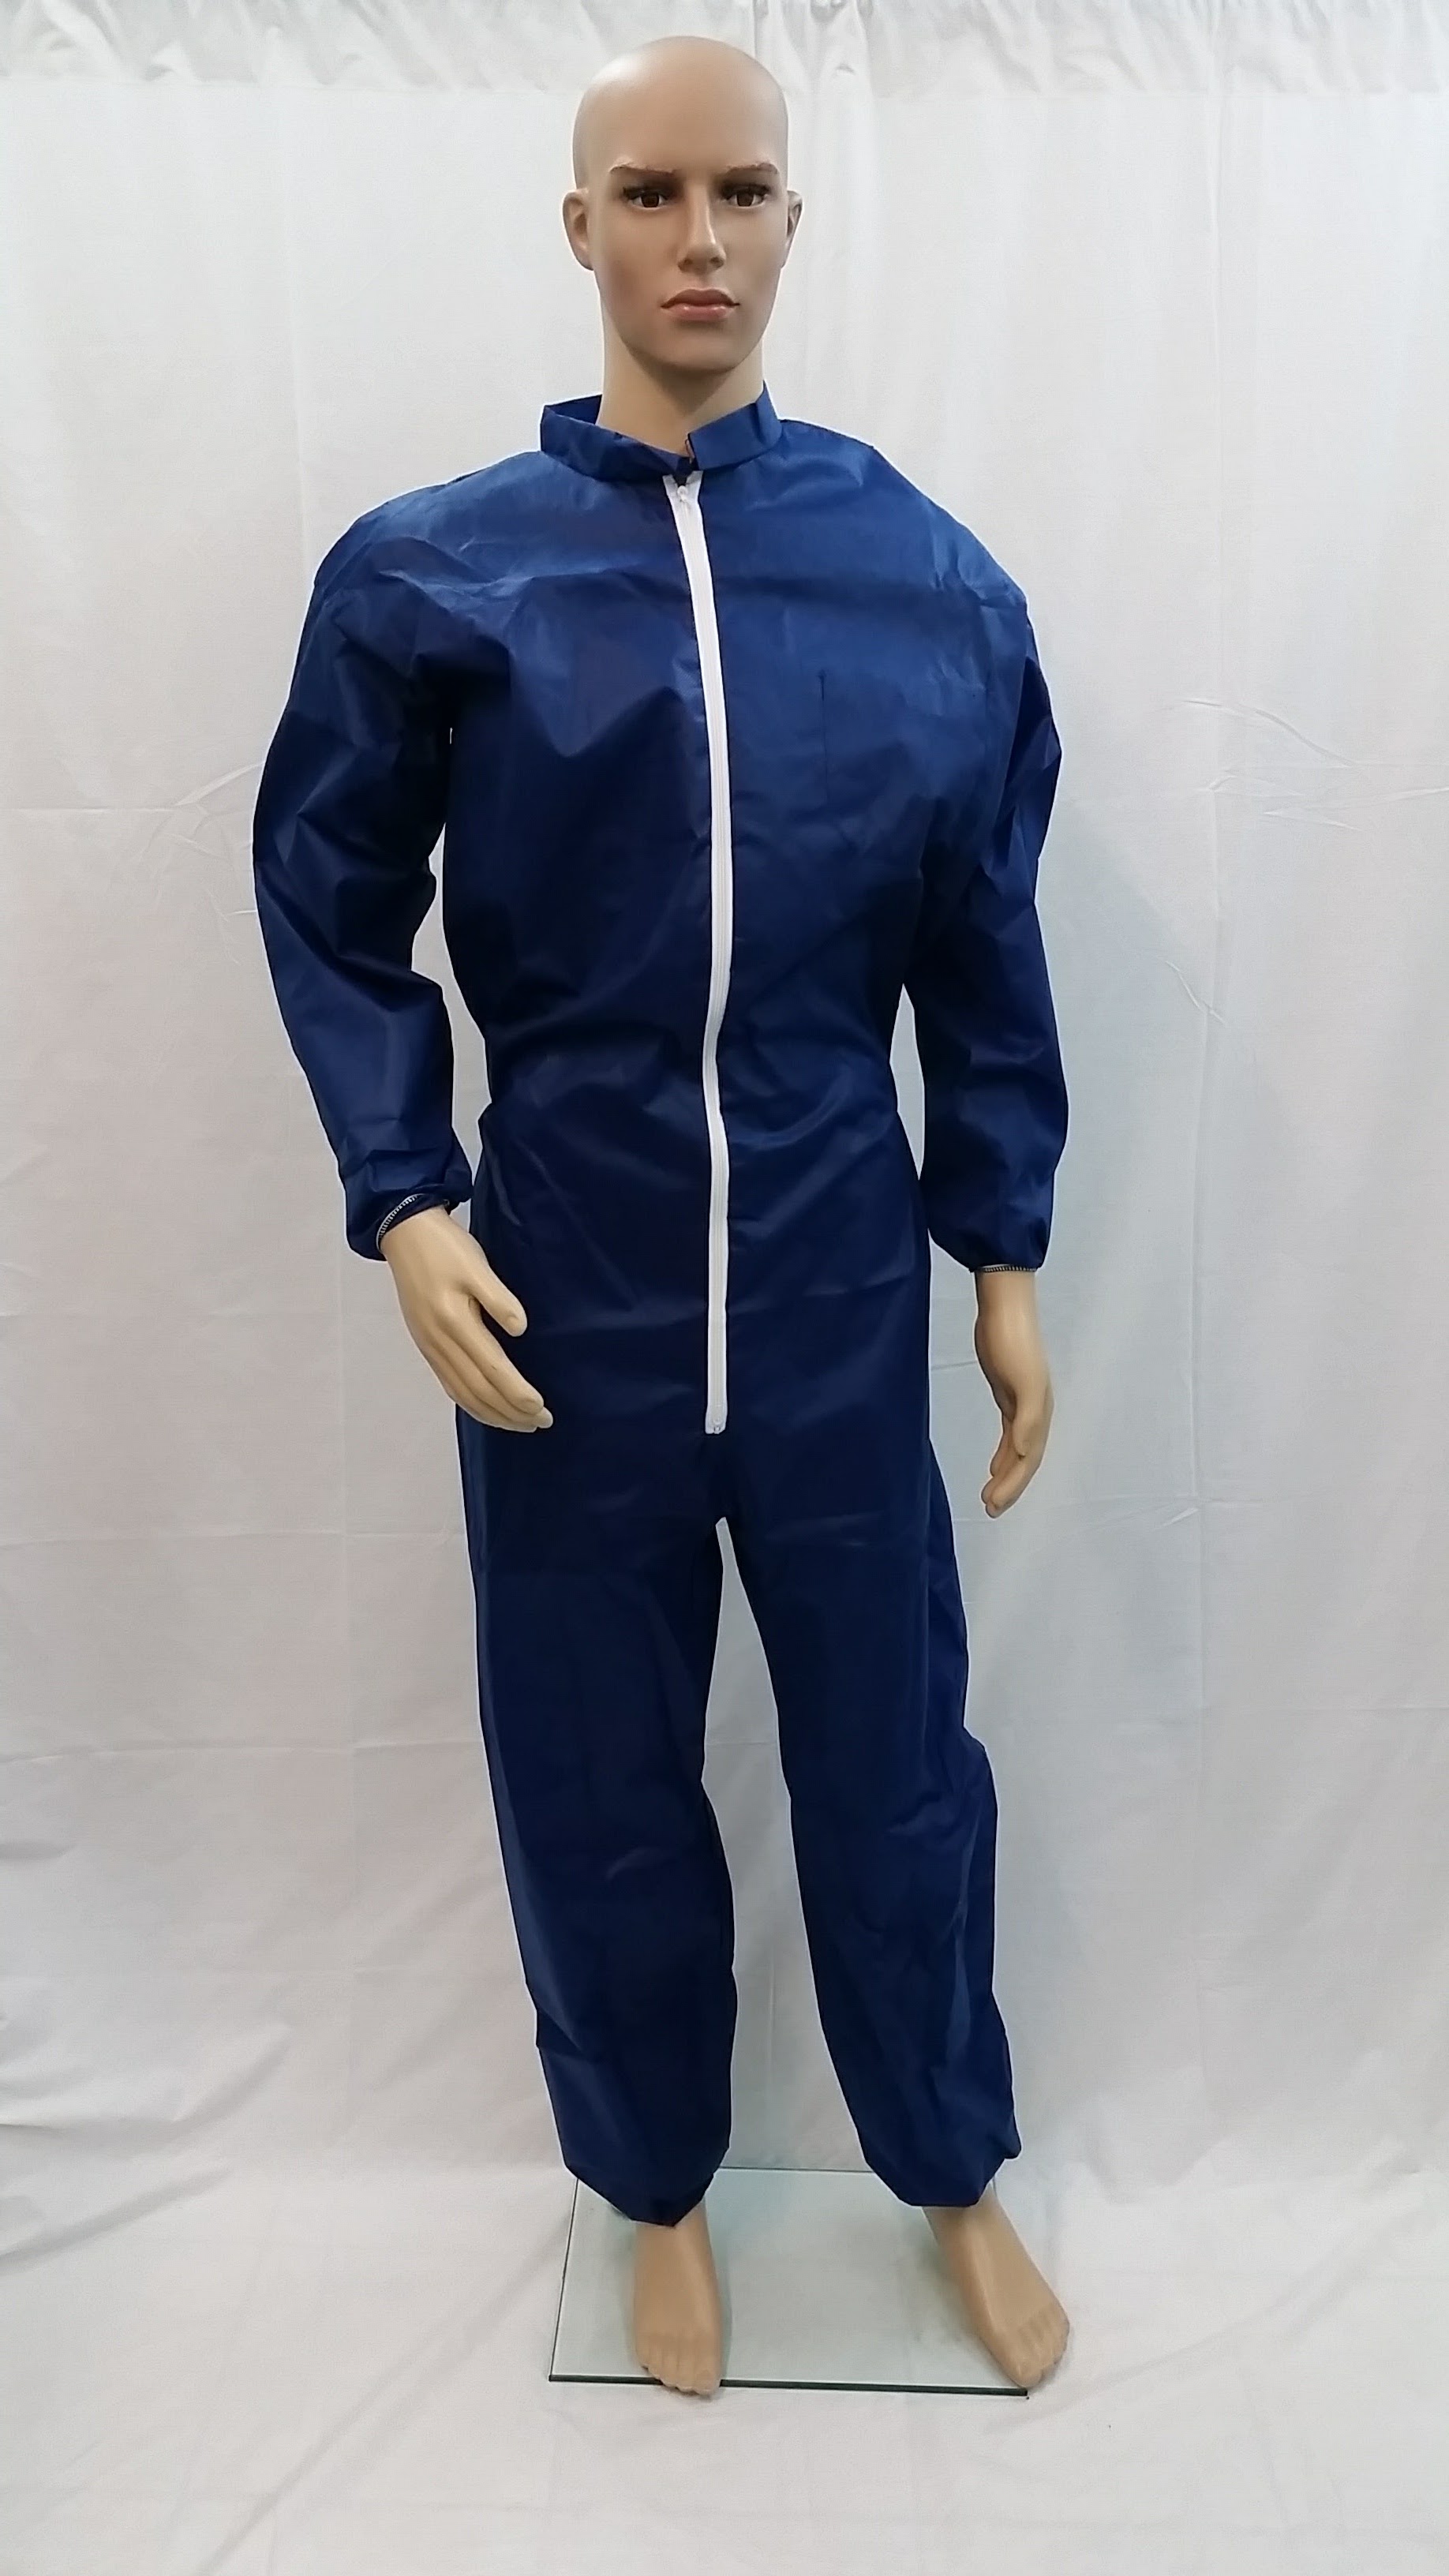 Garments for total and partial protection of the body against slight risks